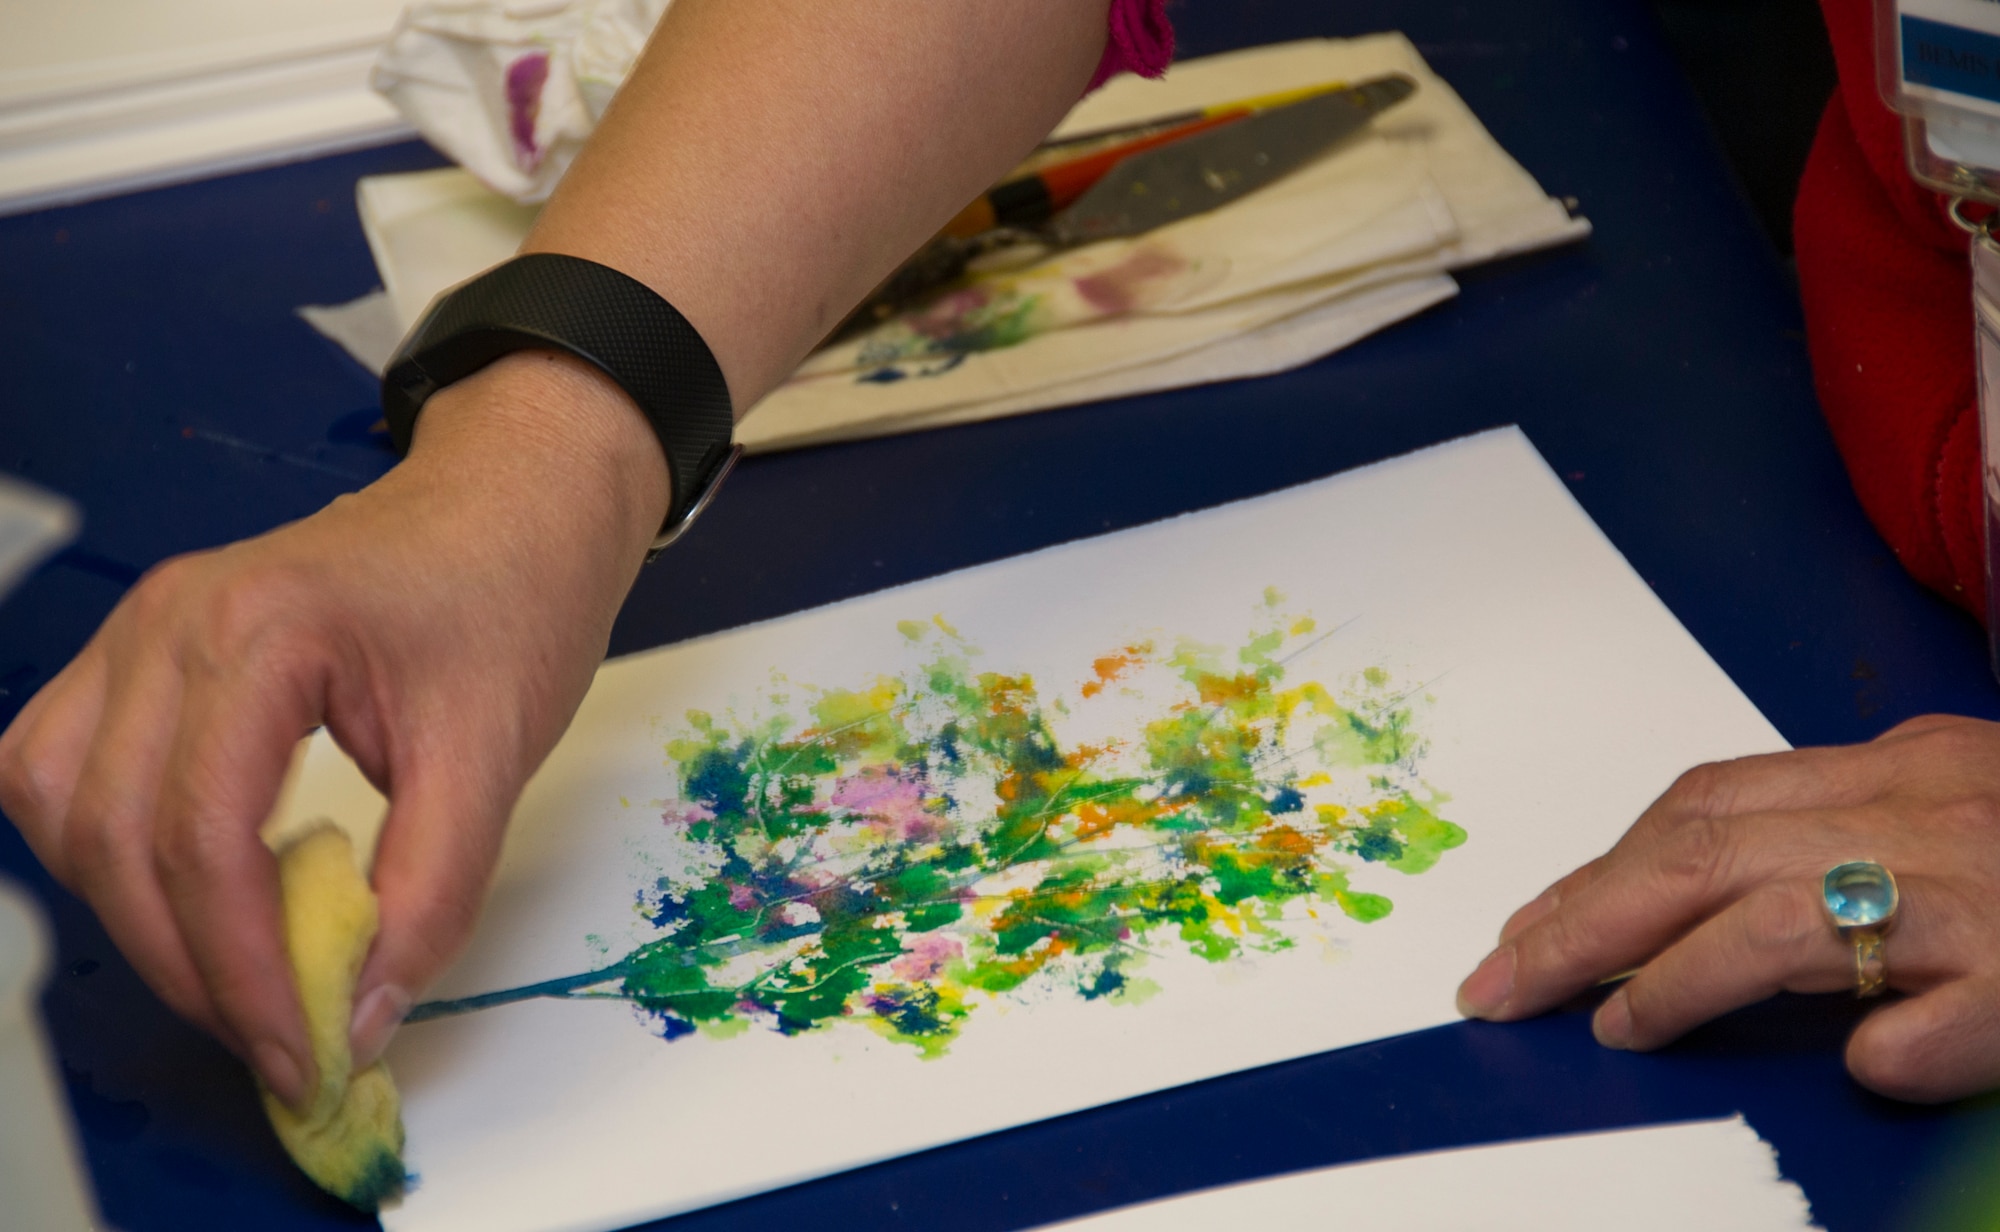 SCHRIEVER AIR FORCE BASE, Colo. -- Kim le Nguyen demonstrates how to create a tree with watercolors during an art therapy course at the Bemis School of Art in Colorado Springs on Friday, Apr. 21st, 2017. Nguyen teaches a Military Artistic Healing program at the Colorado Springs Fine Arts Center, using all forms of art to encourage healing among military members and their families.  (U.S. Air Force photo/Senior Airman Laura Turner)